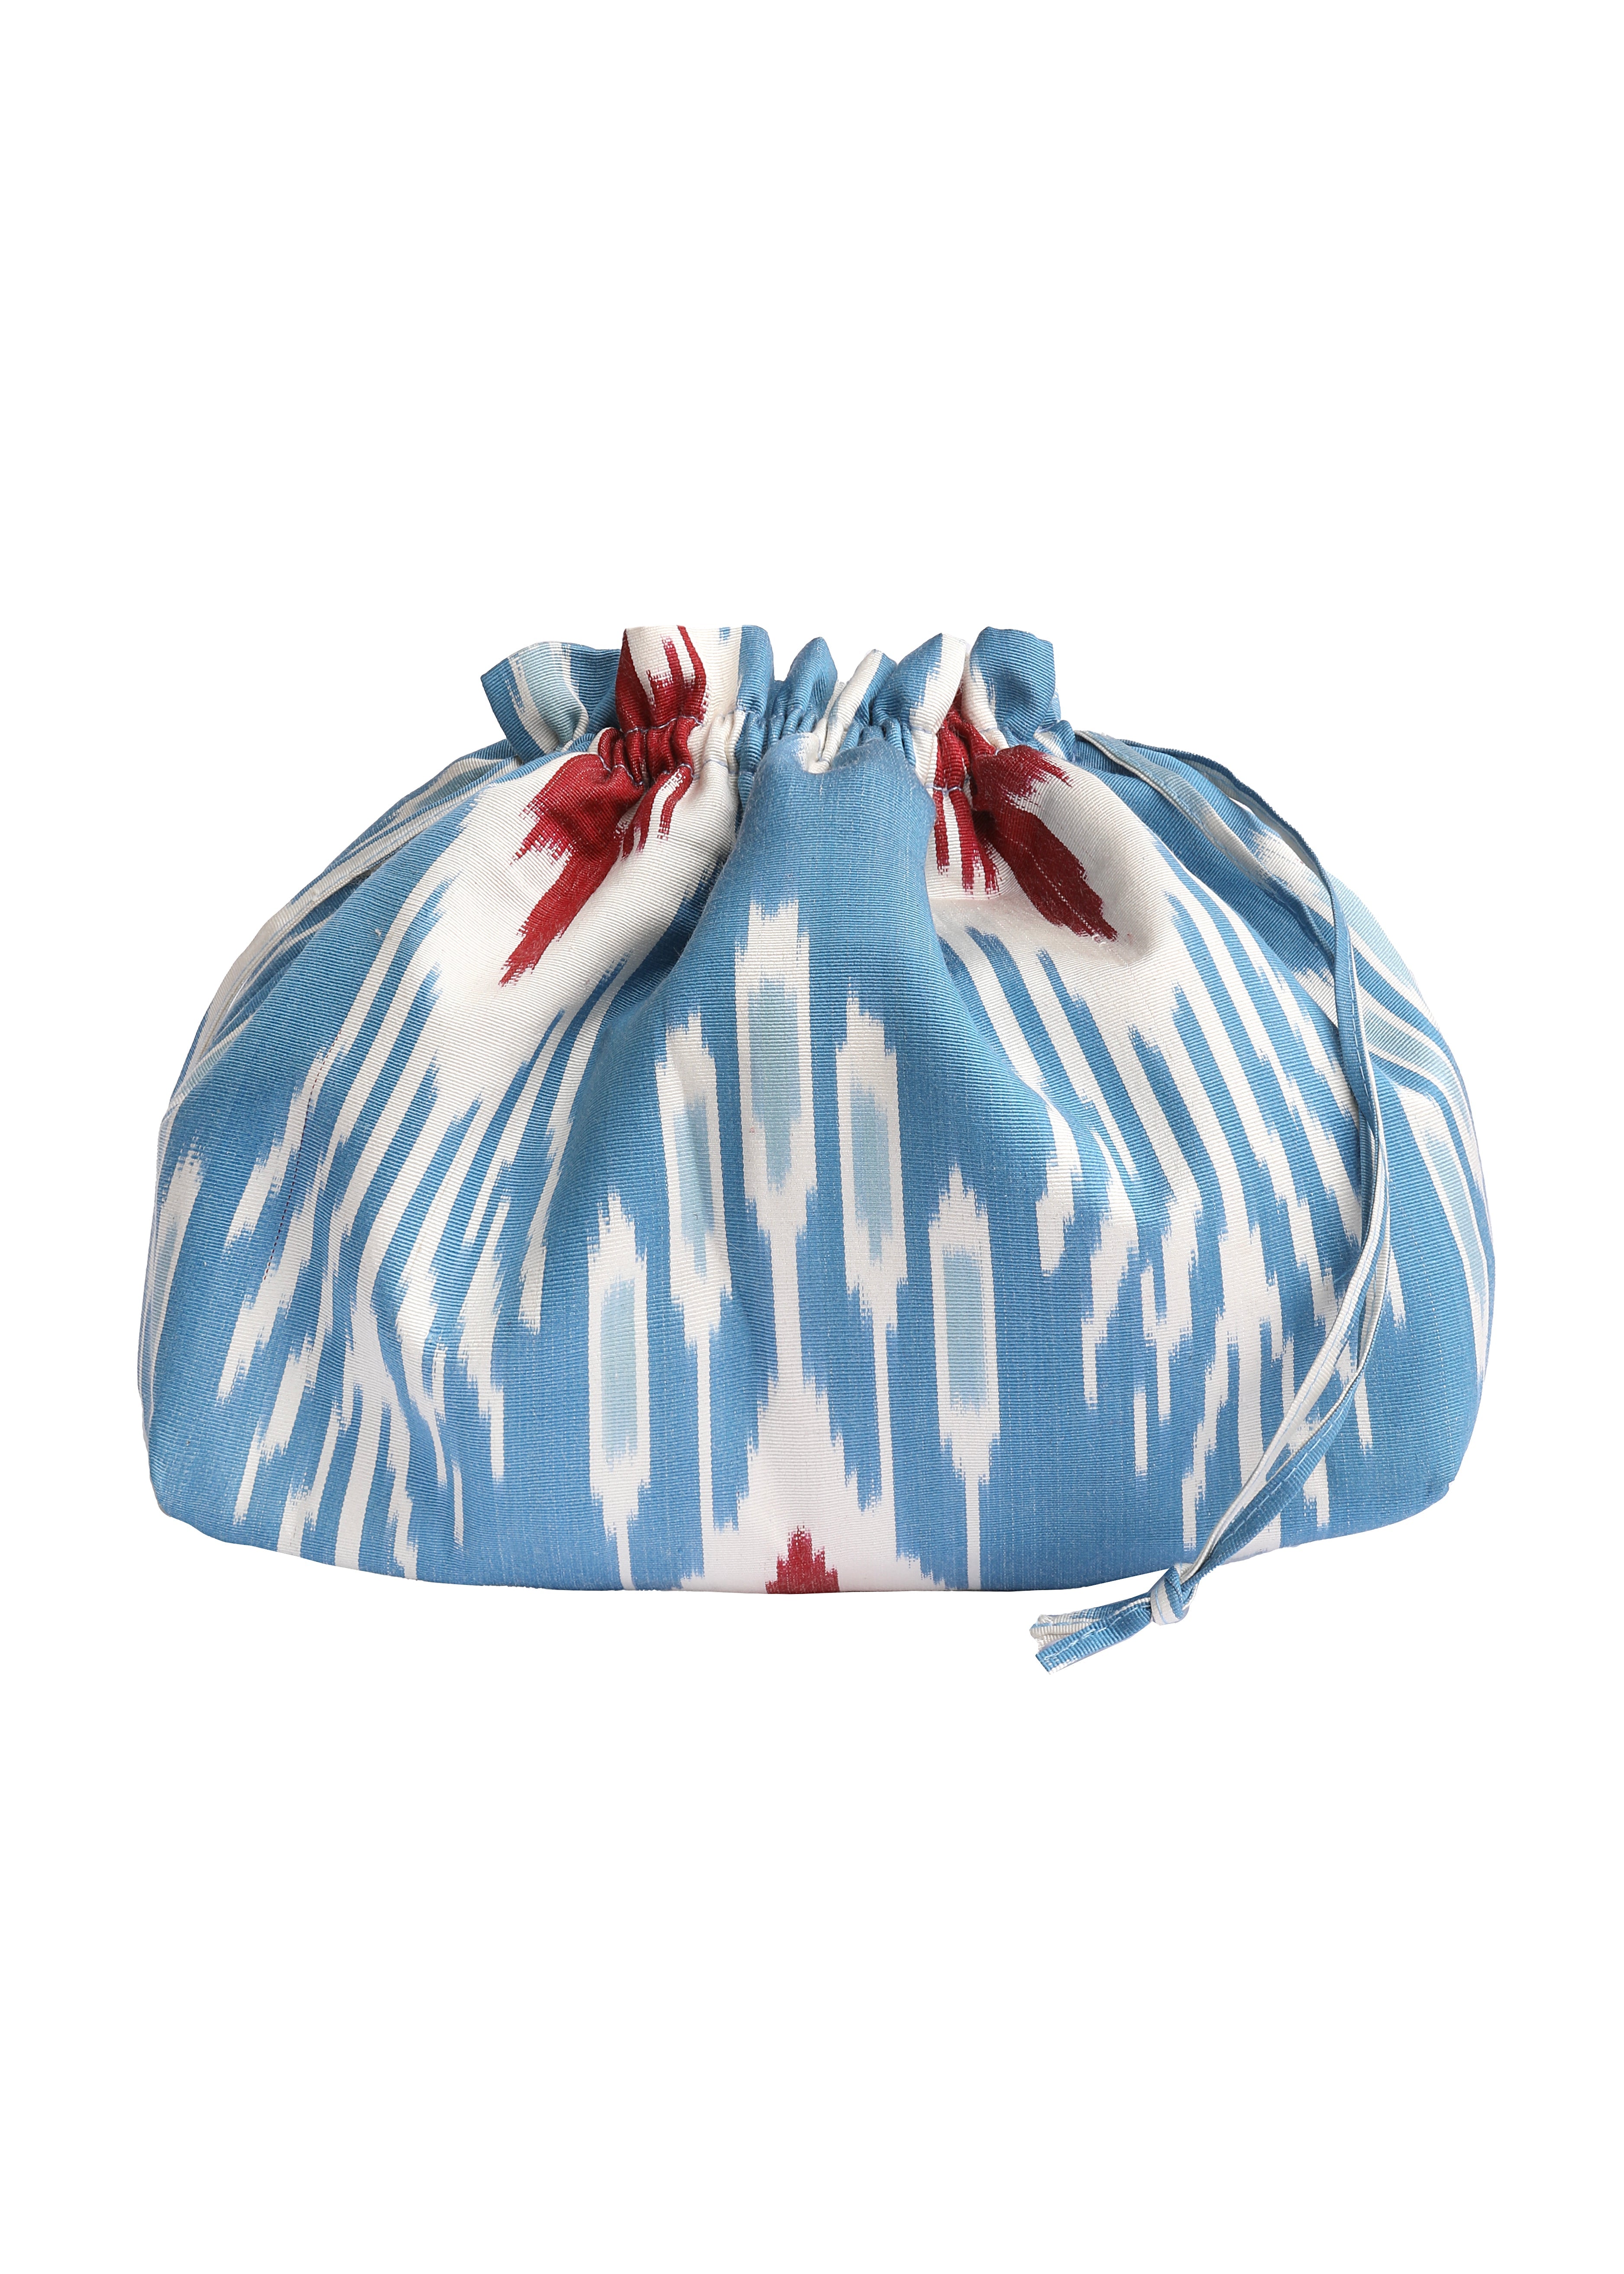 Sconset Silk Ikat Party Purse- French Blue, Red, White by Larkin Lane